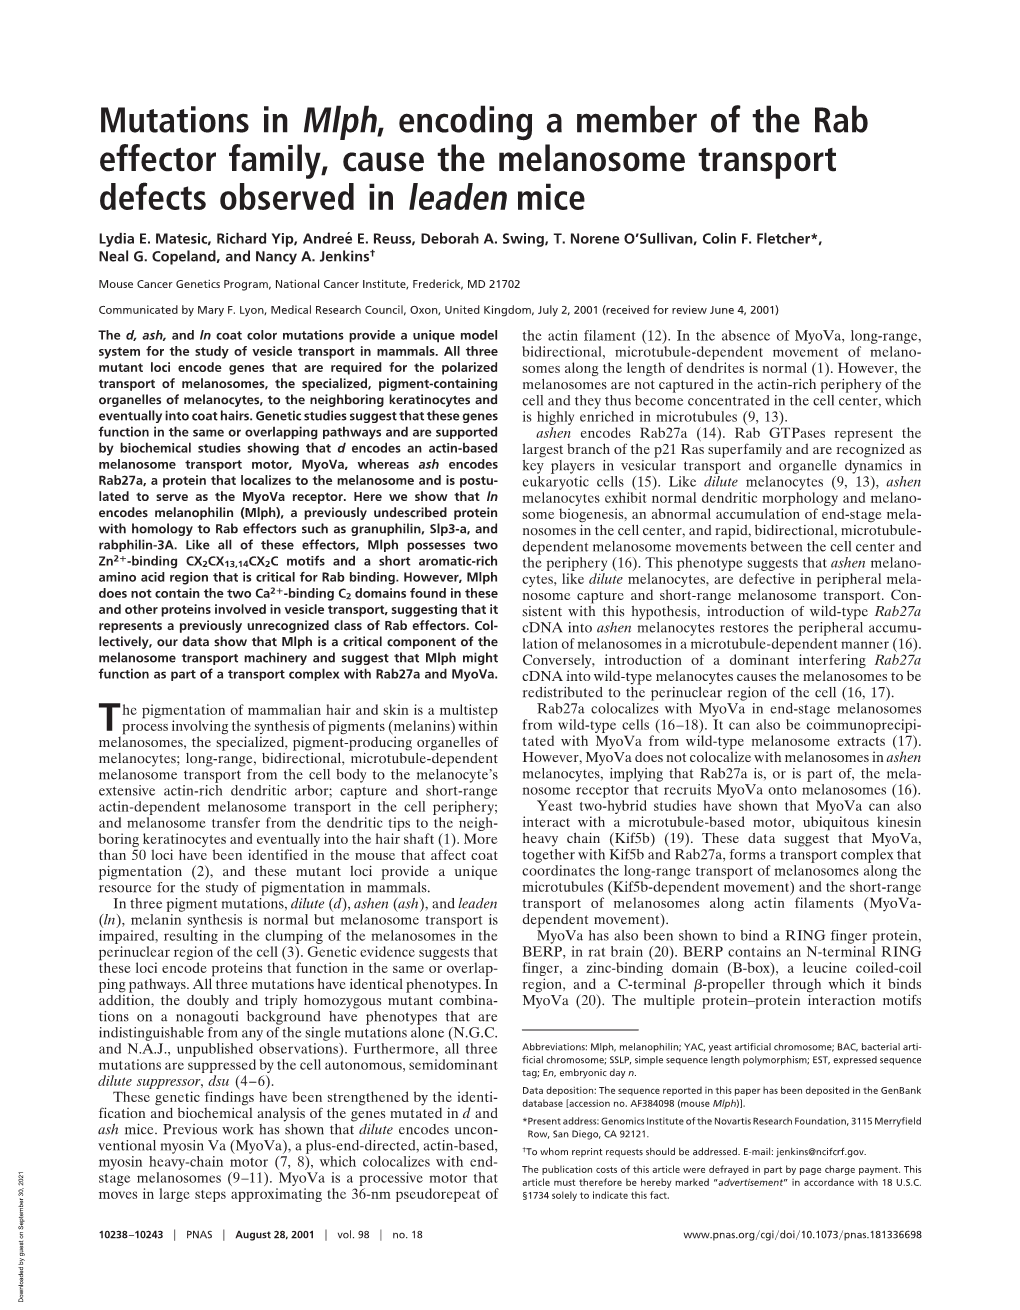 Mutations in Mlph, Encoding a Member of the Rab Effector Family, Cause the Melanosome Transport Defects Observed in Leaden Mice